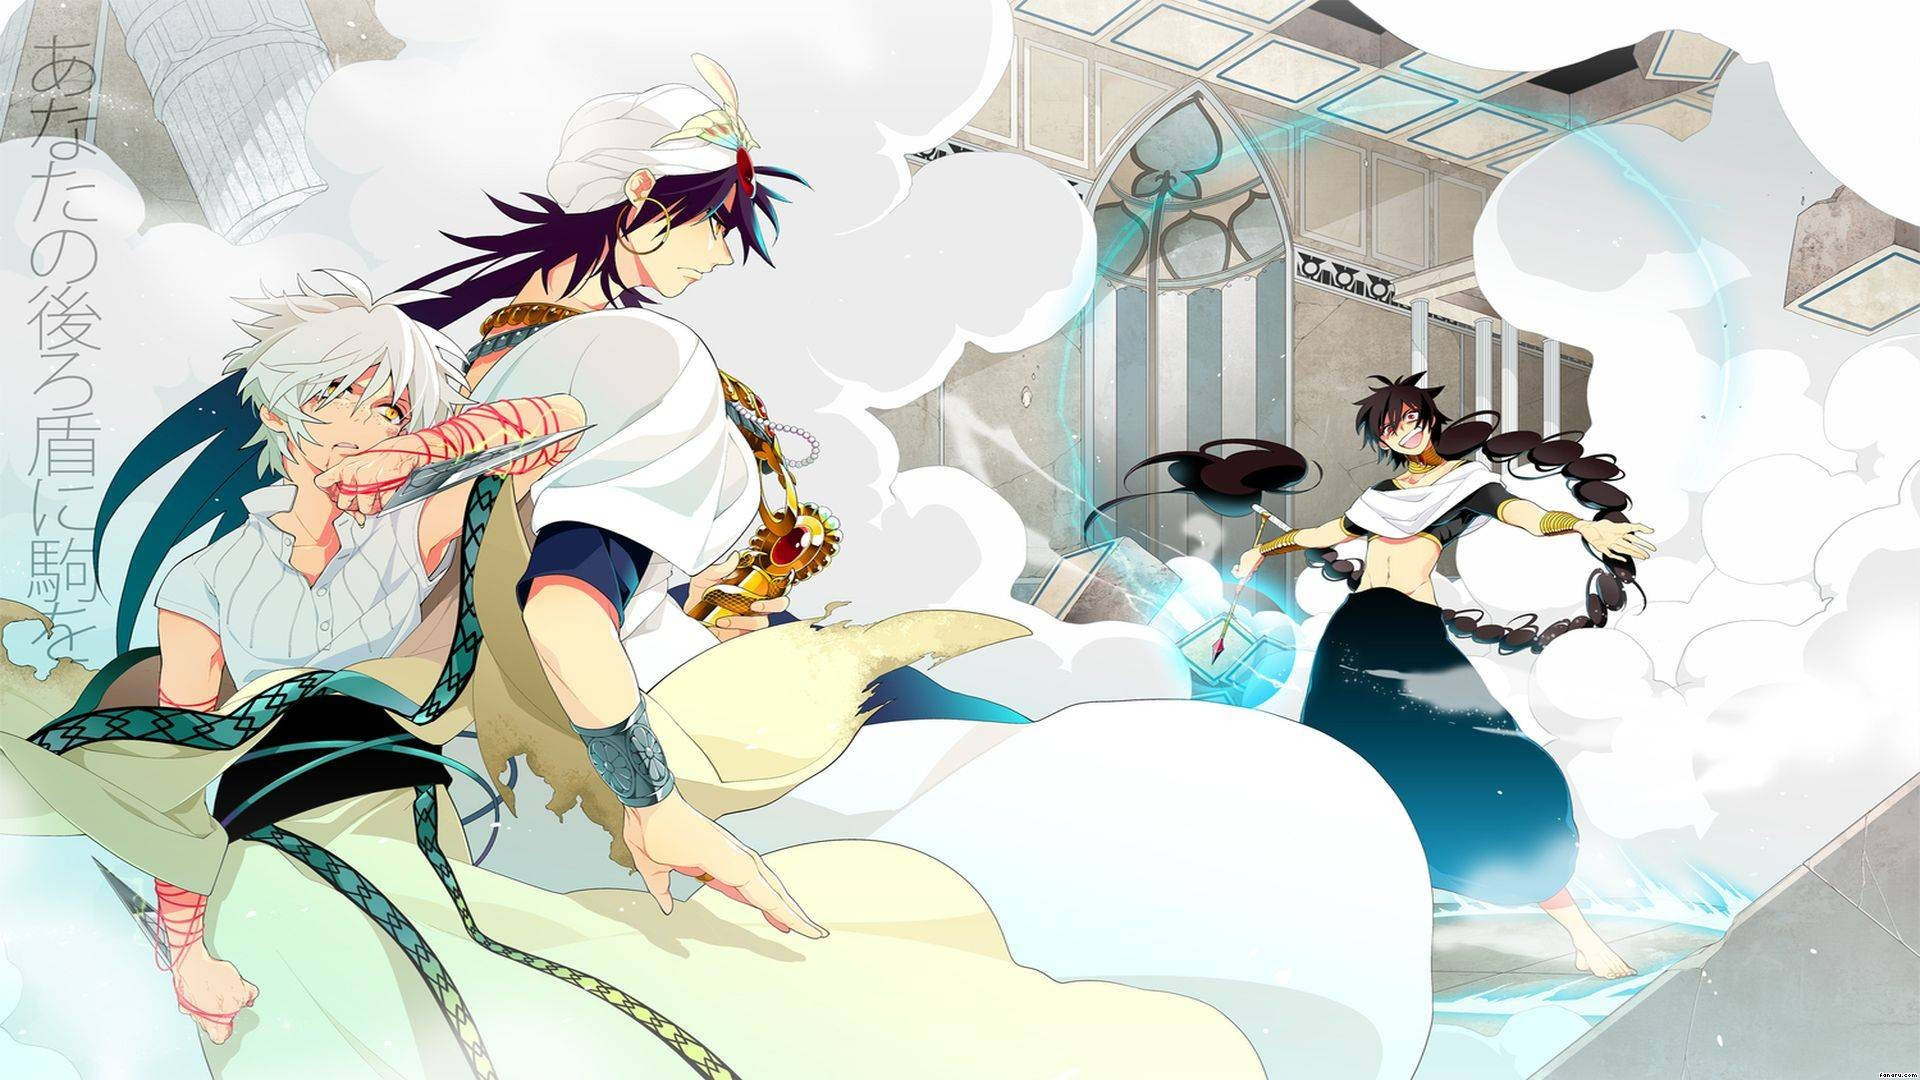 An Animated Scene From Magi: The Kingdom Of Magic Portraying Iconic Characters In A Vivid Fantasy Setting. Background